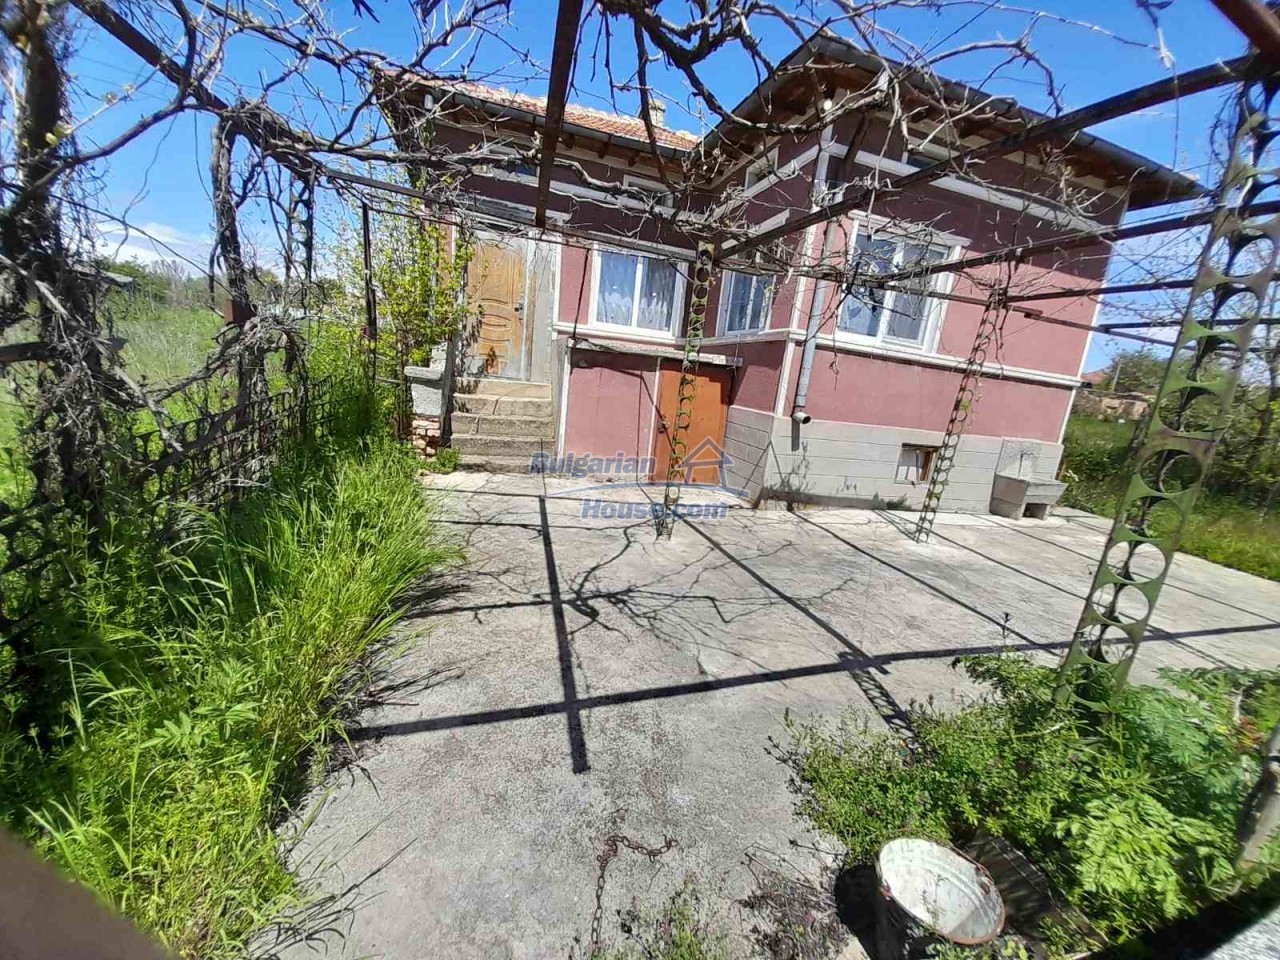 14162:1 - Cheap property for sale  in a village near Dobrich!Hot offer!